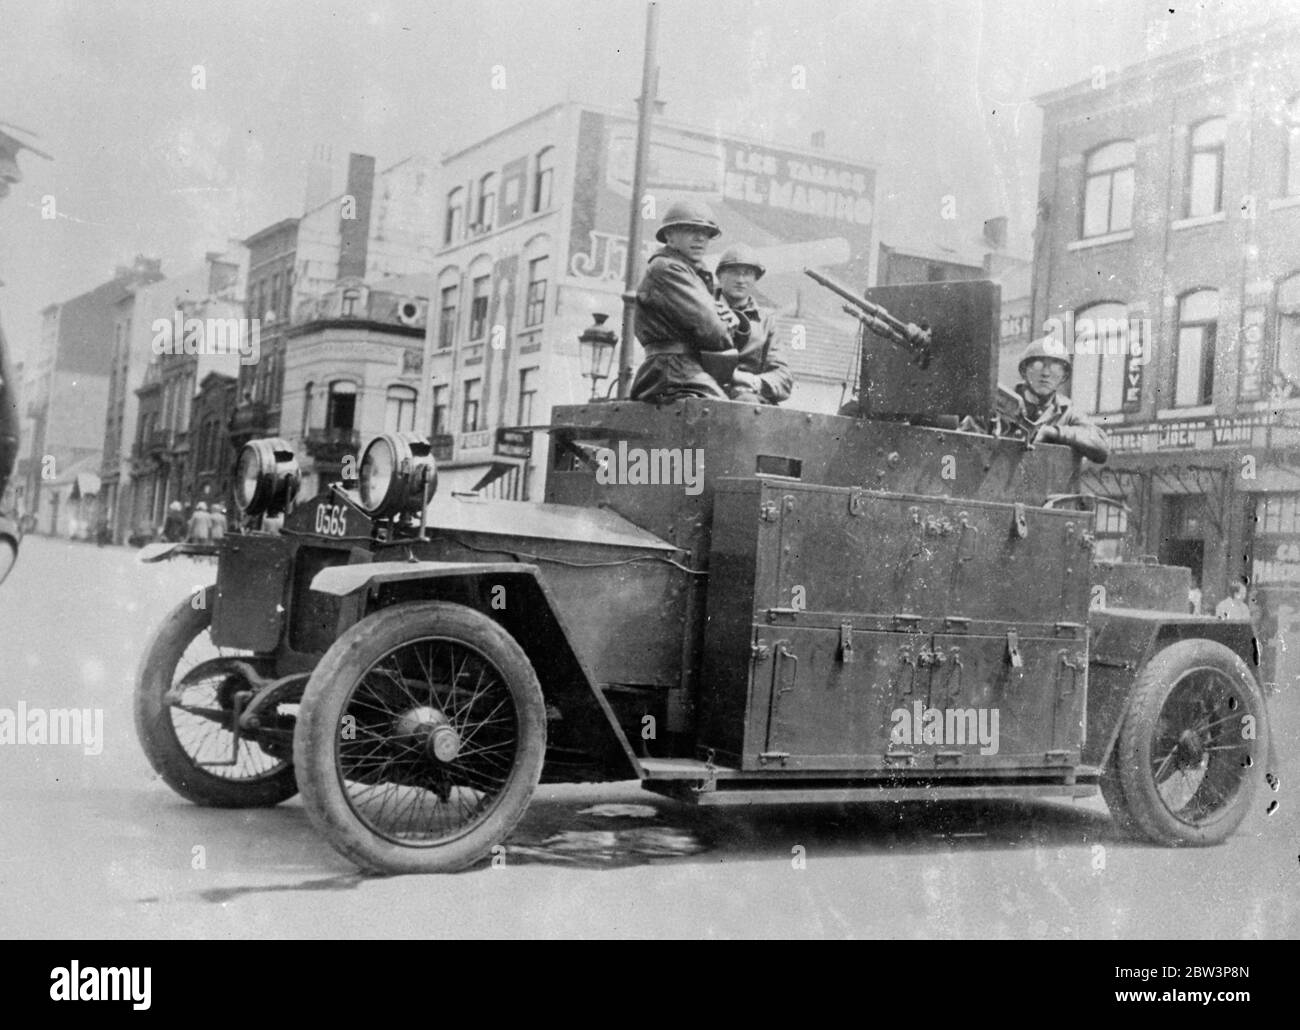 Armoured Cars Patrol Strike - Ridden Liege . Armoured cars , manned by steel - helmeted troops , are co- operating with the police in patrooling the streets of Liege , centre of the Belgian strike area , where mobs of strikers have been demonstrating . Although the prospect of a general stoppage has been averted , many workers in the industrial areas are still on strike . Photo Shows : An armoured car with its steel - helmeted crew on patrol in a Liege street . 22 Jun 1936 Stock Photo